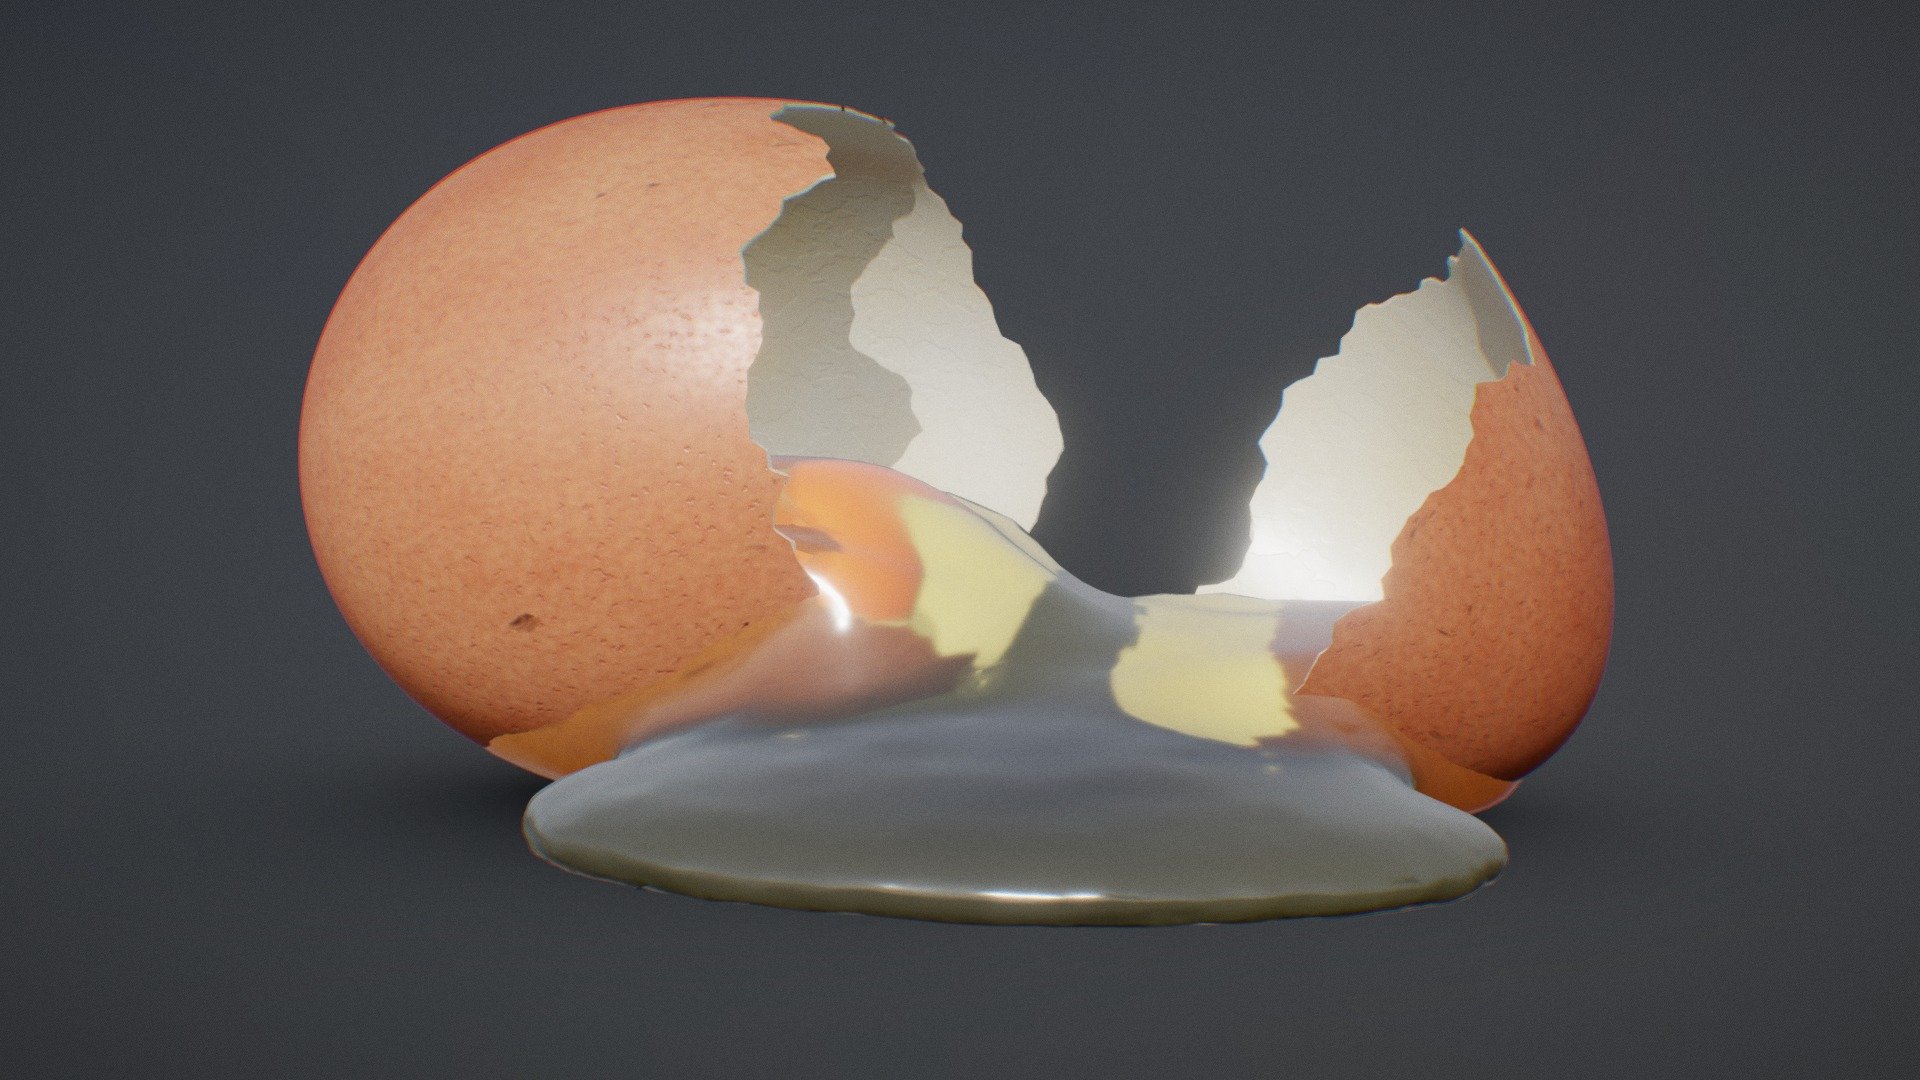 A.k.a. When life gives you eggs&hellip;




Created in Blender and Gimp.

The egg model is a simple elongated UV-sphere, cut in two through a boolean modifier using a subdivided plane, which vertices have been randomized.

The egg white was simulated with fluids physics, before being manually sculpted to correct artifacts and smoothen it. The yolk was added manually later.

All the shell textures are procedural, and were created with Cycles nodes baked to the exported model before actually &ldquo;cracking